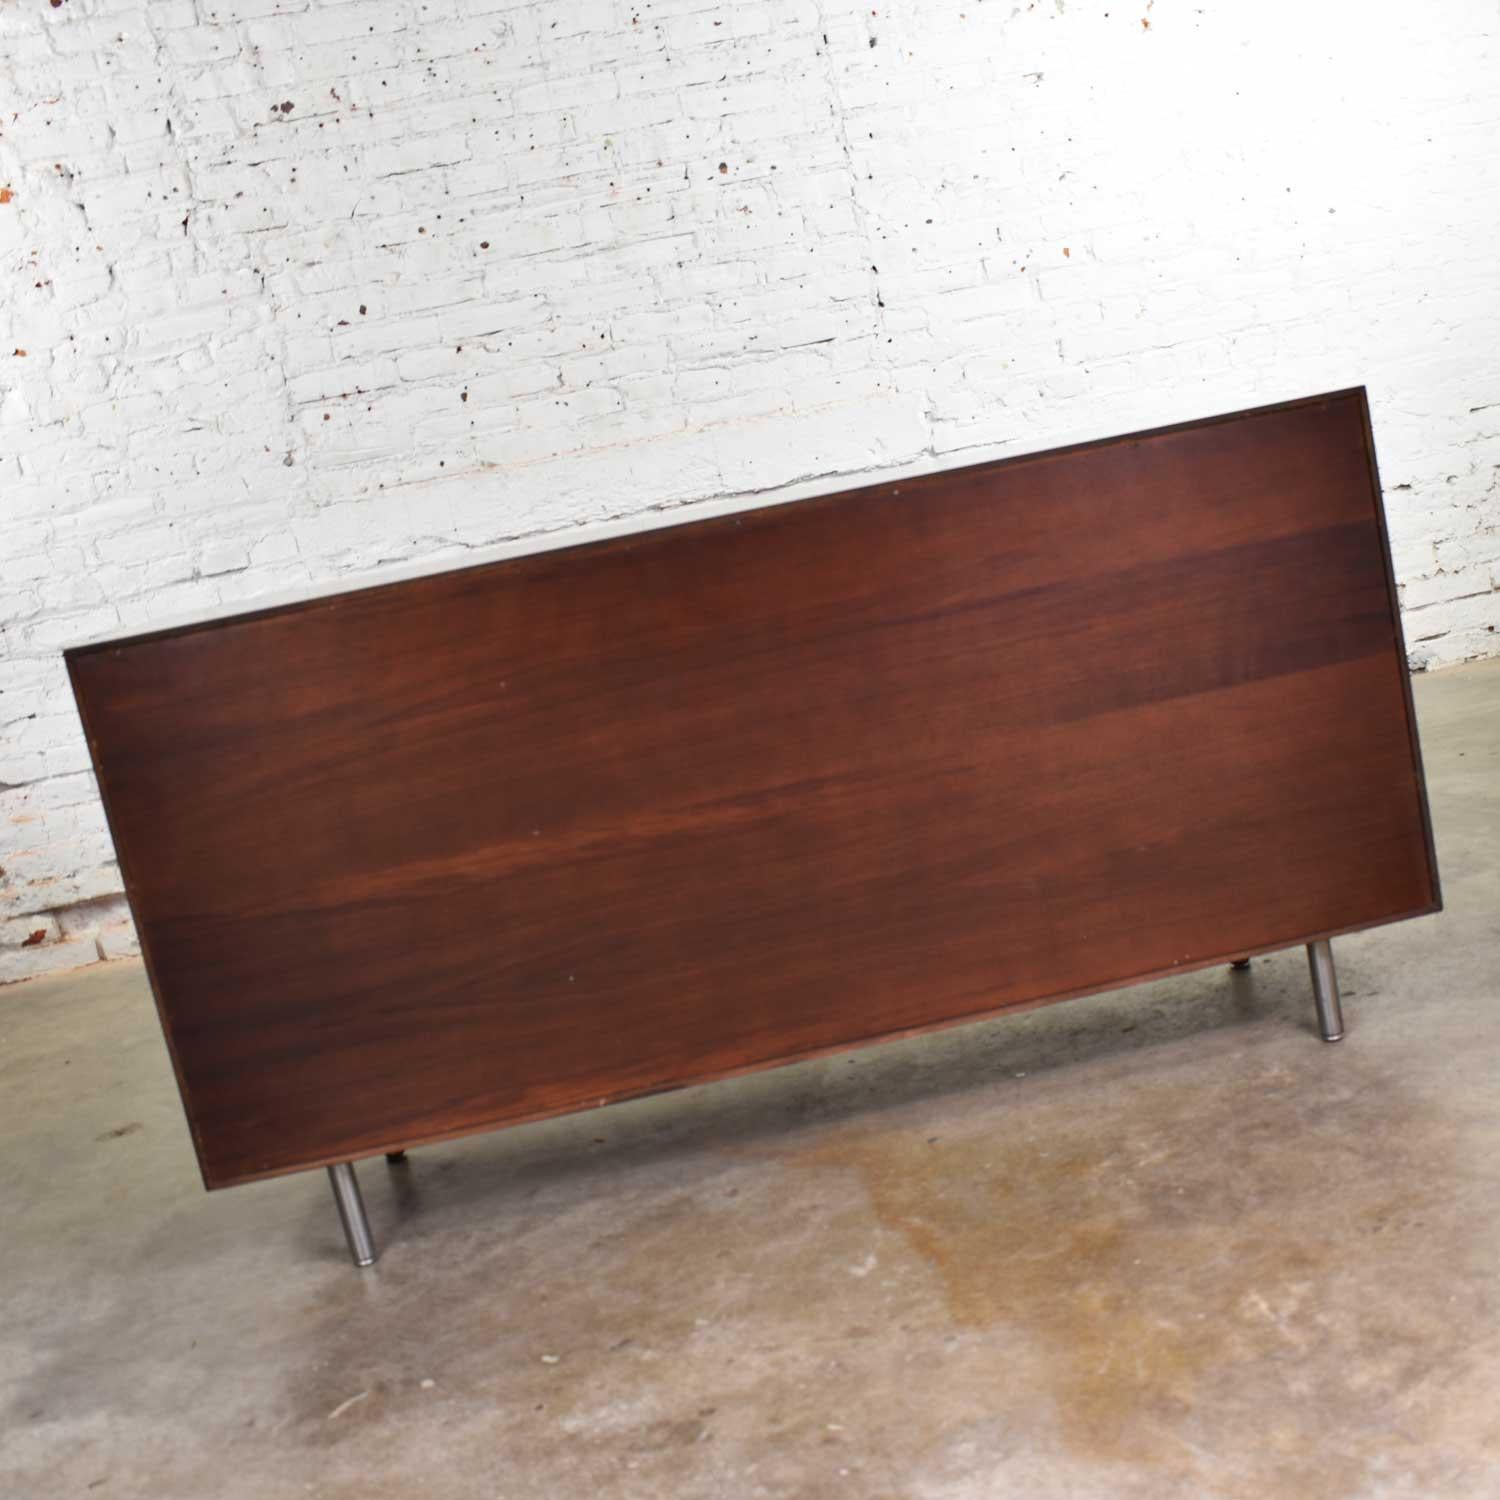 Early Basic Cabinet Series Walnut Sideboard Credenza by George Nelson for Herman 3